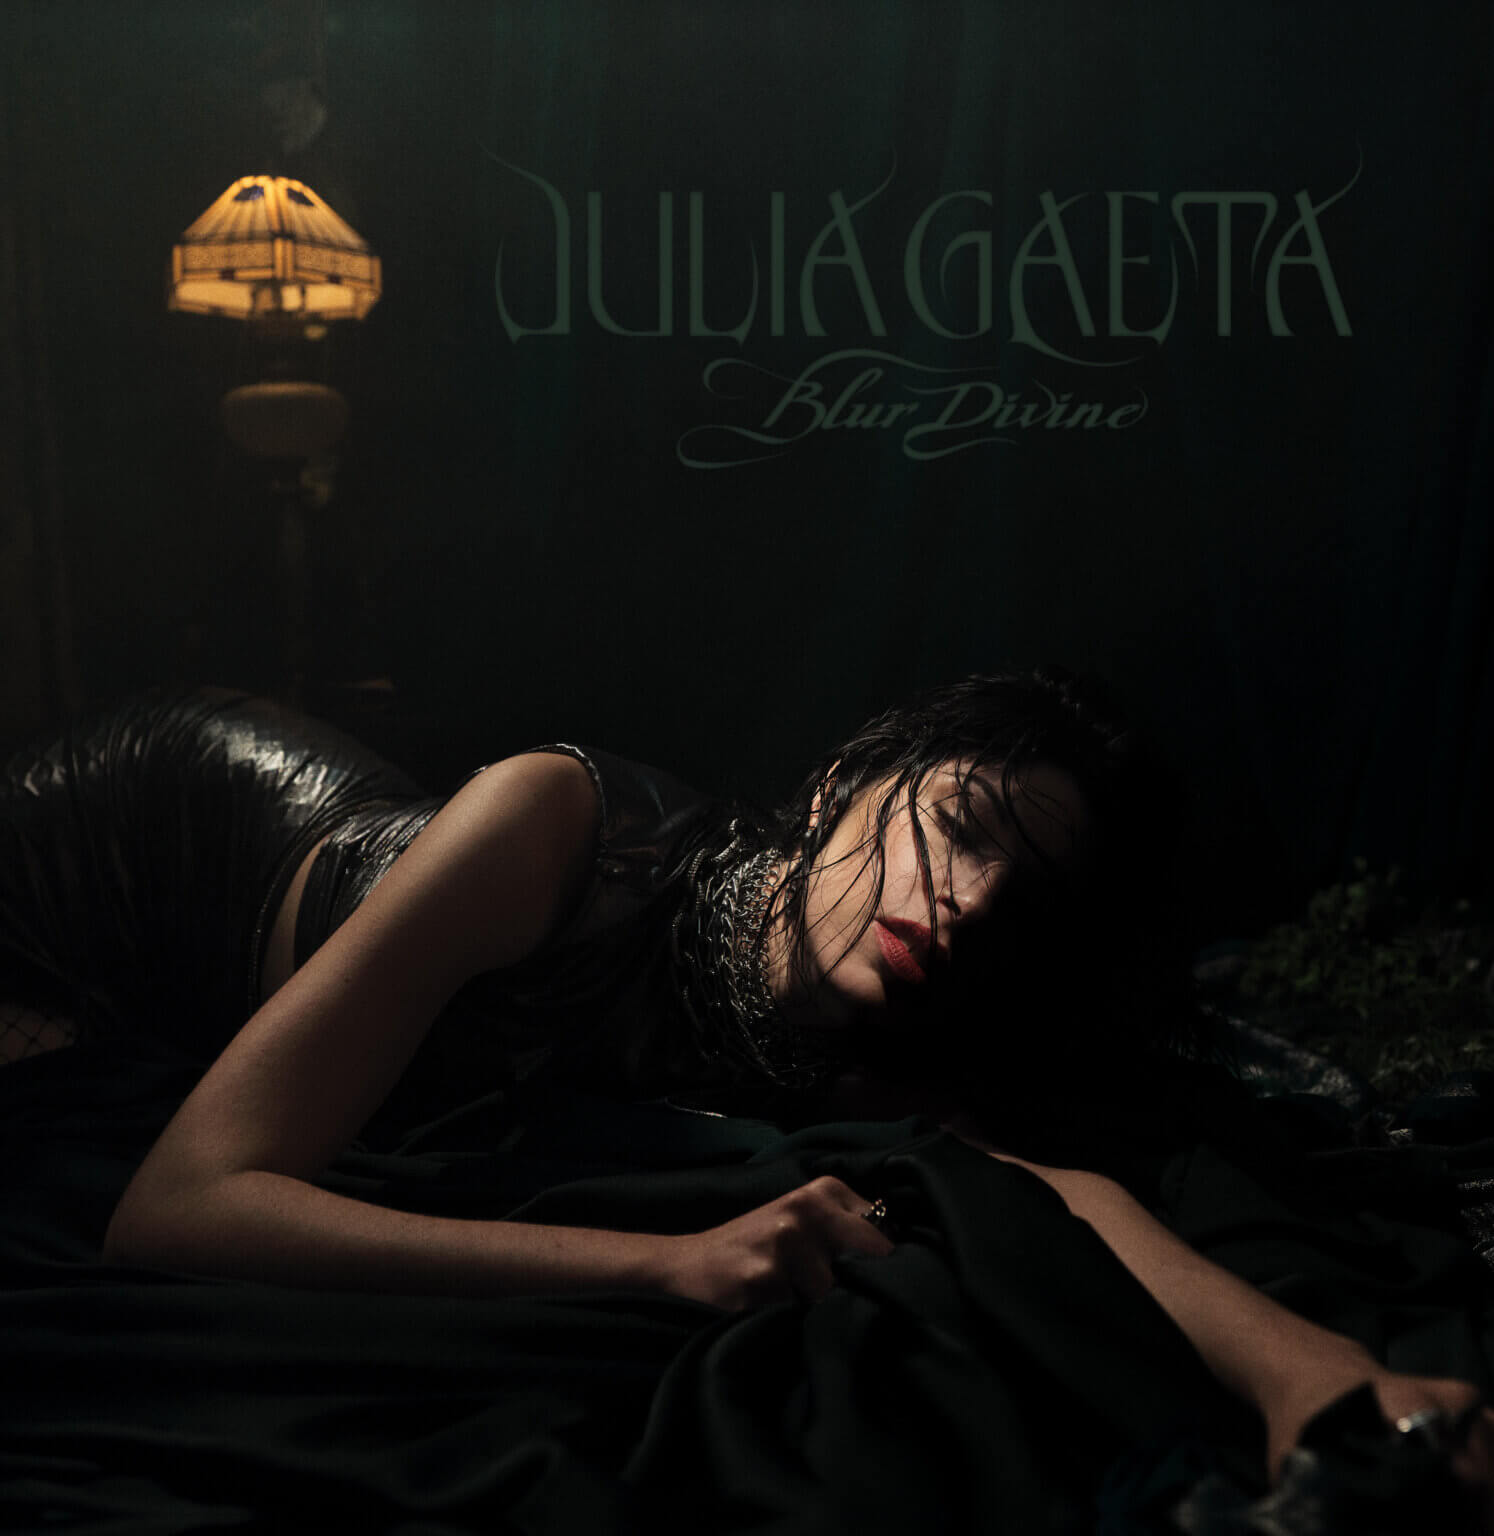 Julia Gaeta Releases Blur Divine EP. The singer-songwriter's new Alex DeGroot produced album is now available via streaming services